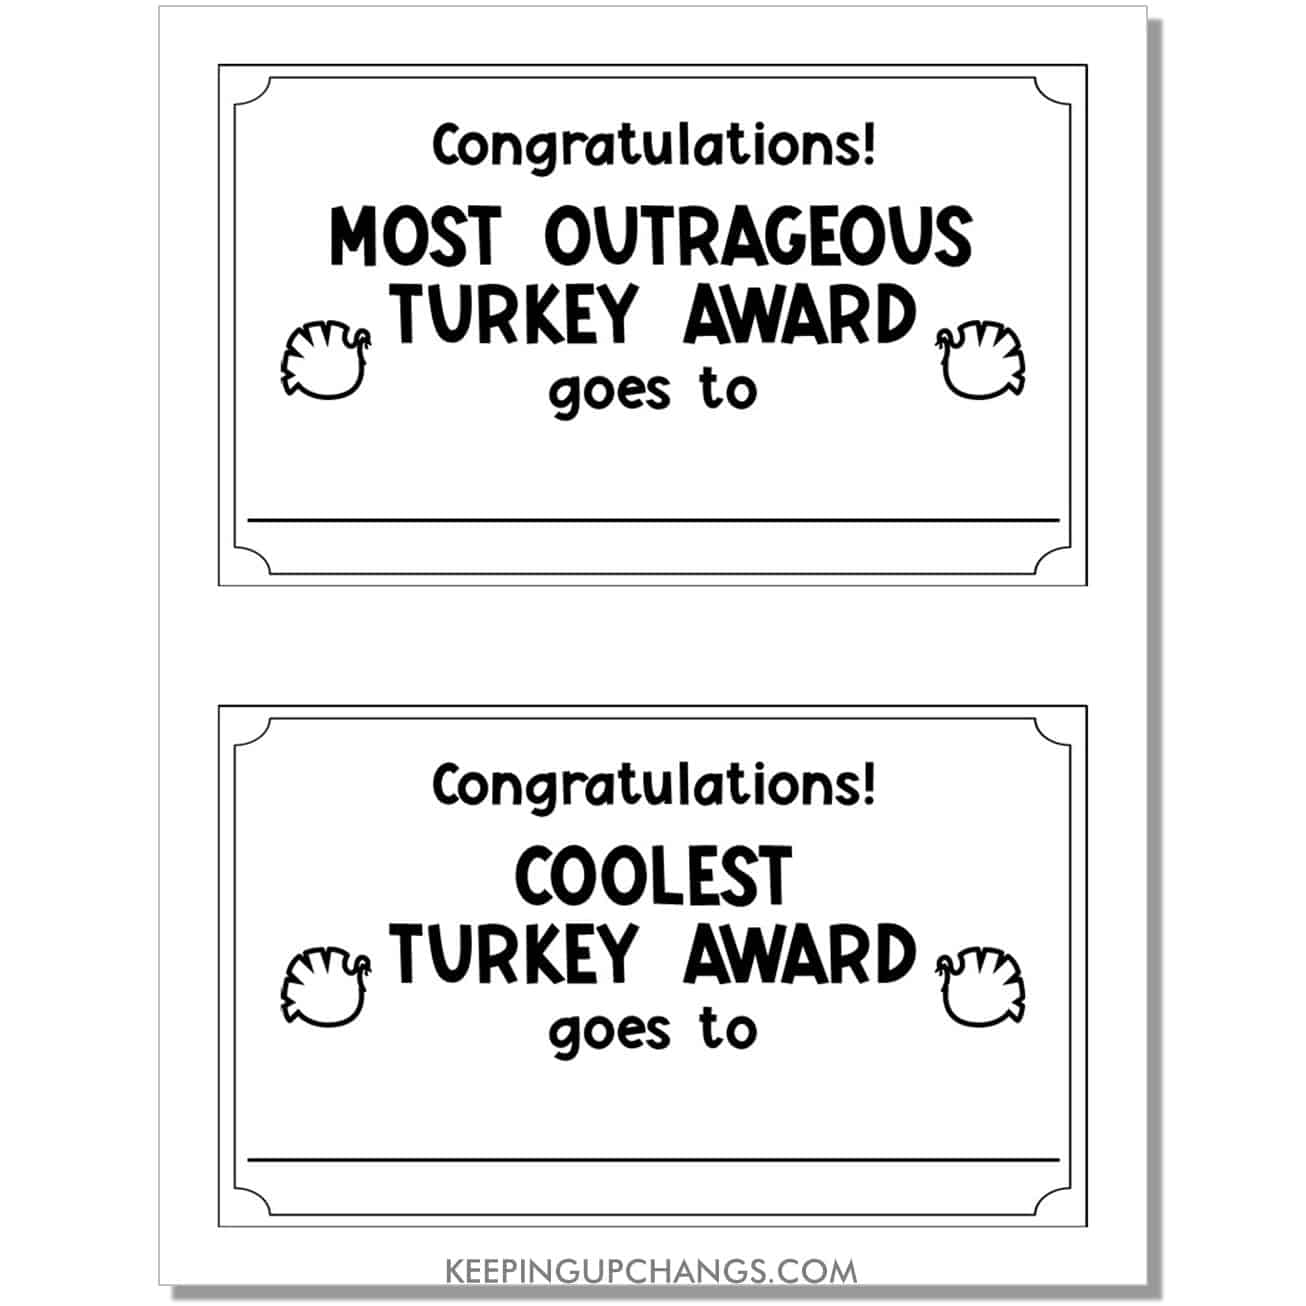 turkey disguise award for most outrageous and coolest hide the turkey ideas.